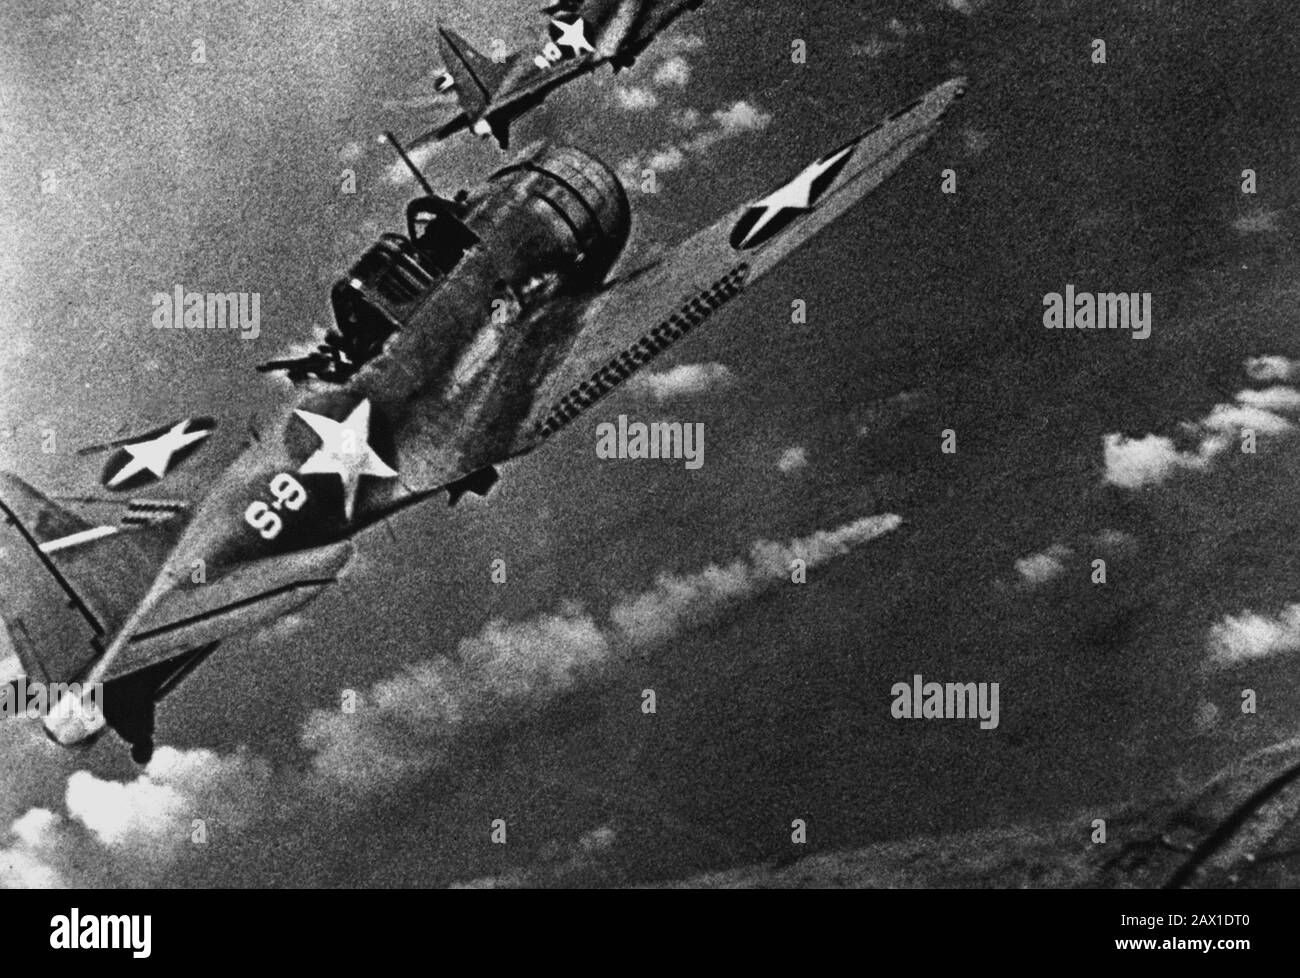 1942 , 6 june , USA : MIDWAY BATTLE .  Navy fighters during the attack on the Japanese fleet off Midway, June 4th to 6th 1942.  In the center is visible a burning Japanese ship.  (Navy)  U.S. Navy Douglas SBD-3 'Dauntless' dive bombers from scouting squadron VS-8 from the aircraft carrier USS Hornet (CV-8) approaching the burning Japanese heavy cruiser MIKUMA to make the third set of attacks on her, during the Battle of Midway, 6 June 1942.  Mikuma had been hit earlier by strikes from Hornet and USS Enterprise (CV-6), leaving her dead in the water and fatally damaged. Note bombs hung beneath t Stock Photo